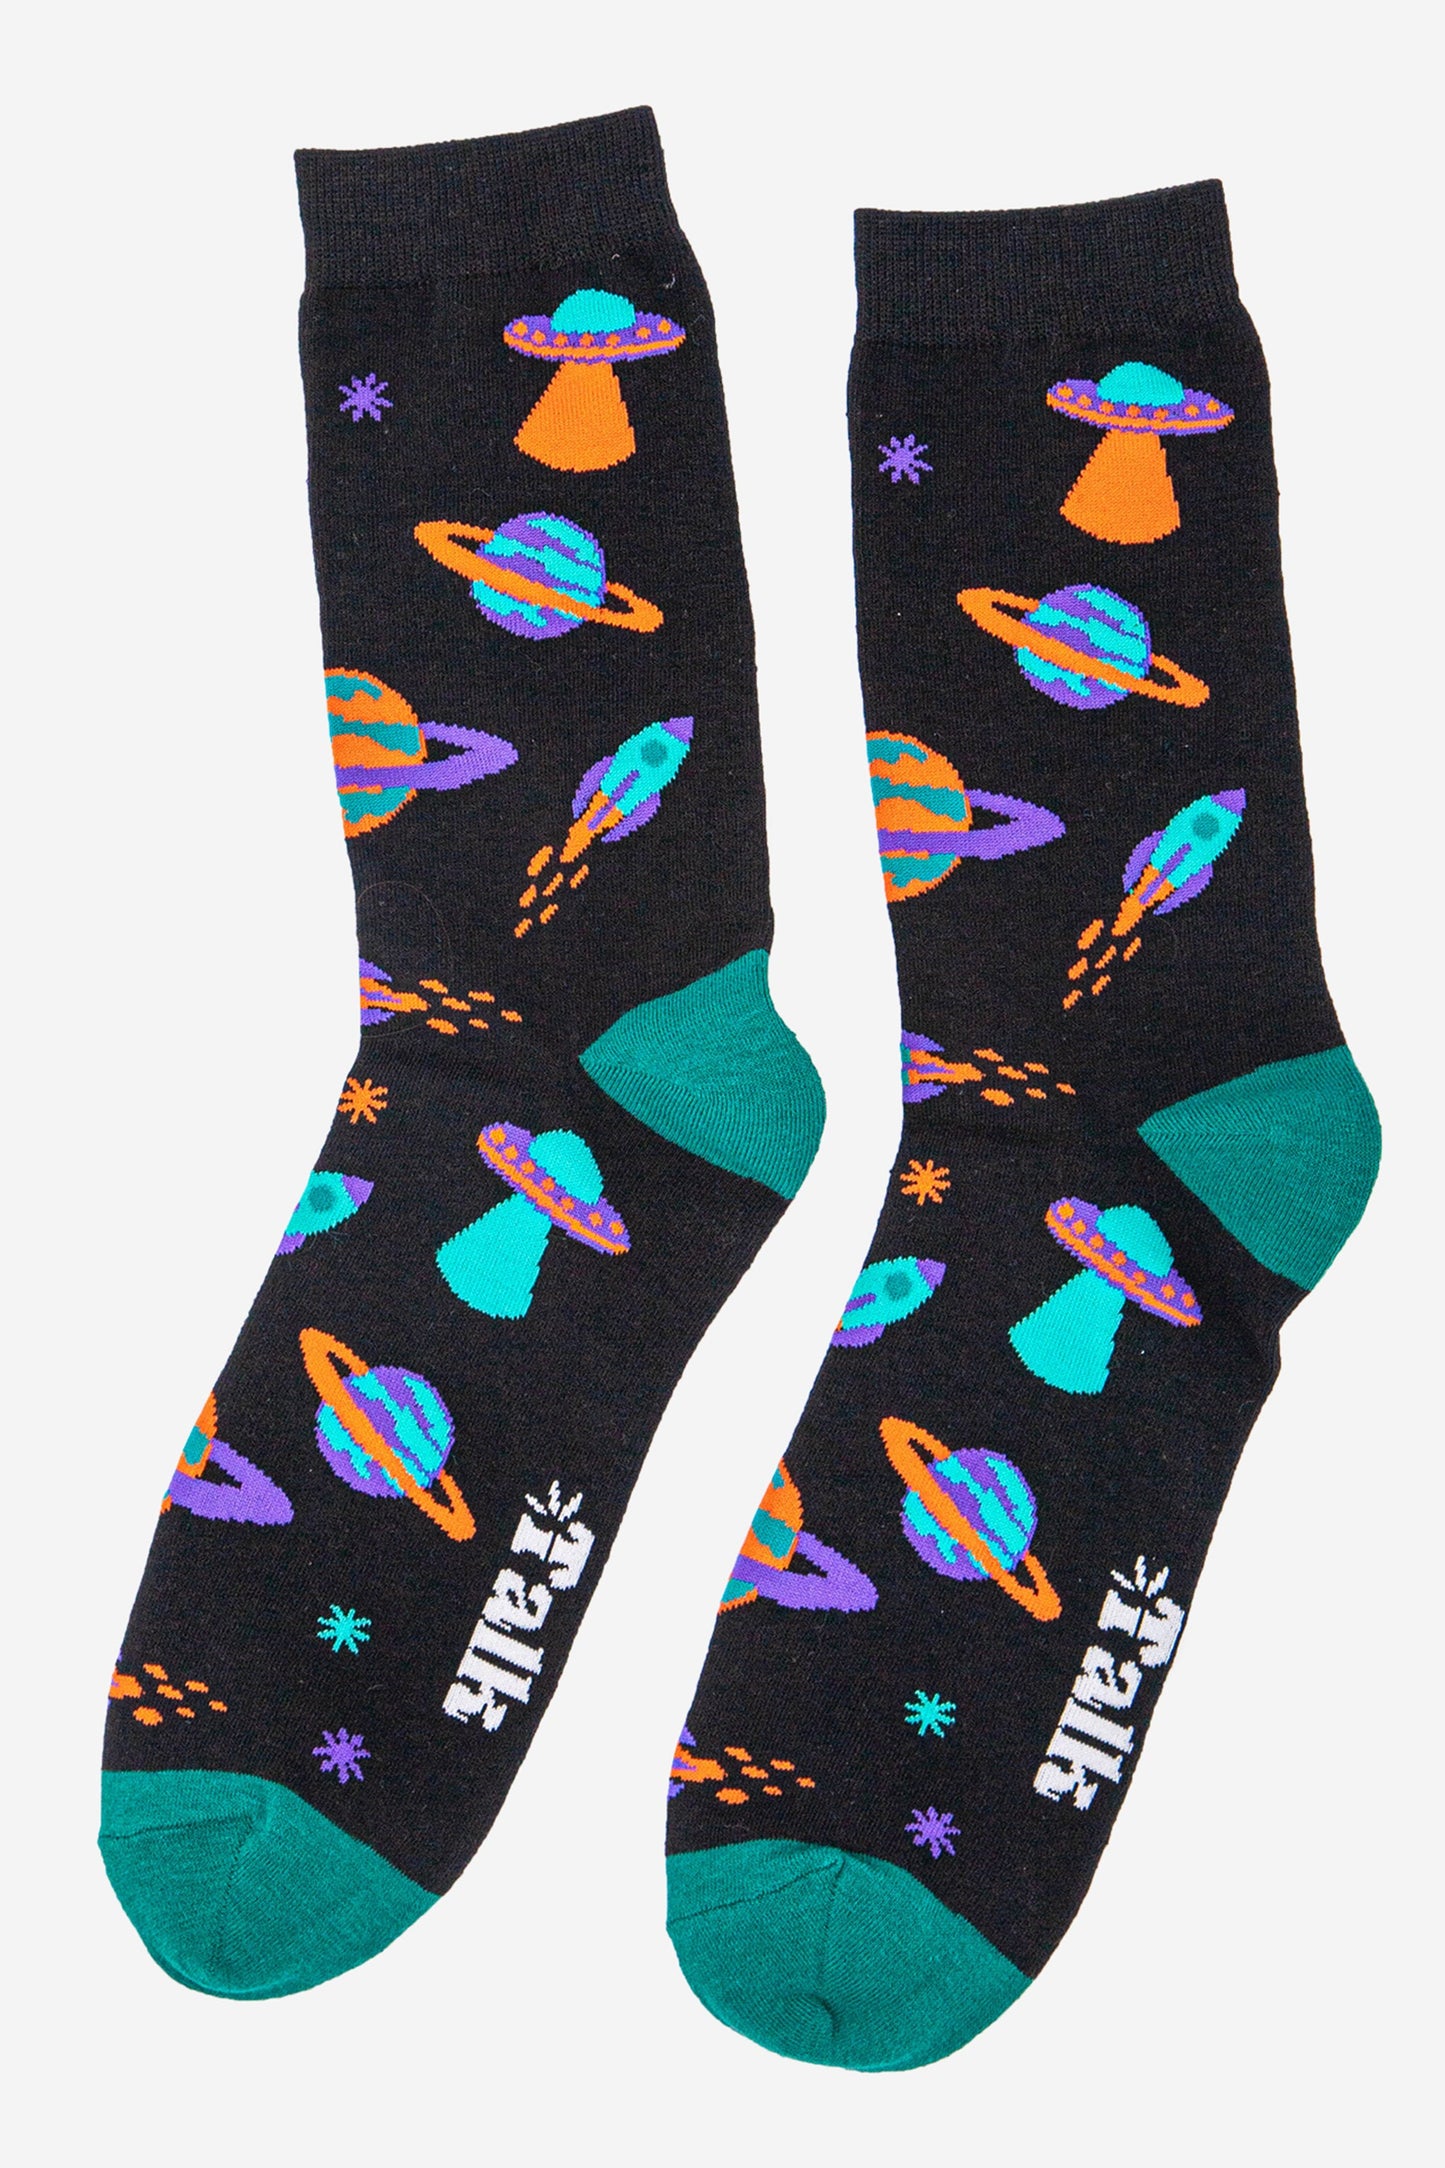 black novelty socks featuring a space themed pattern with planets, rockets and stars